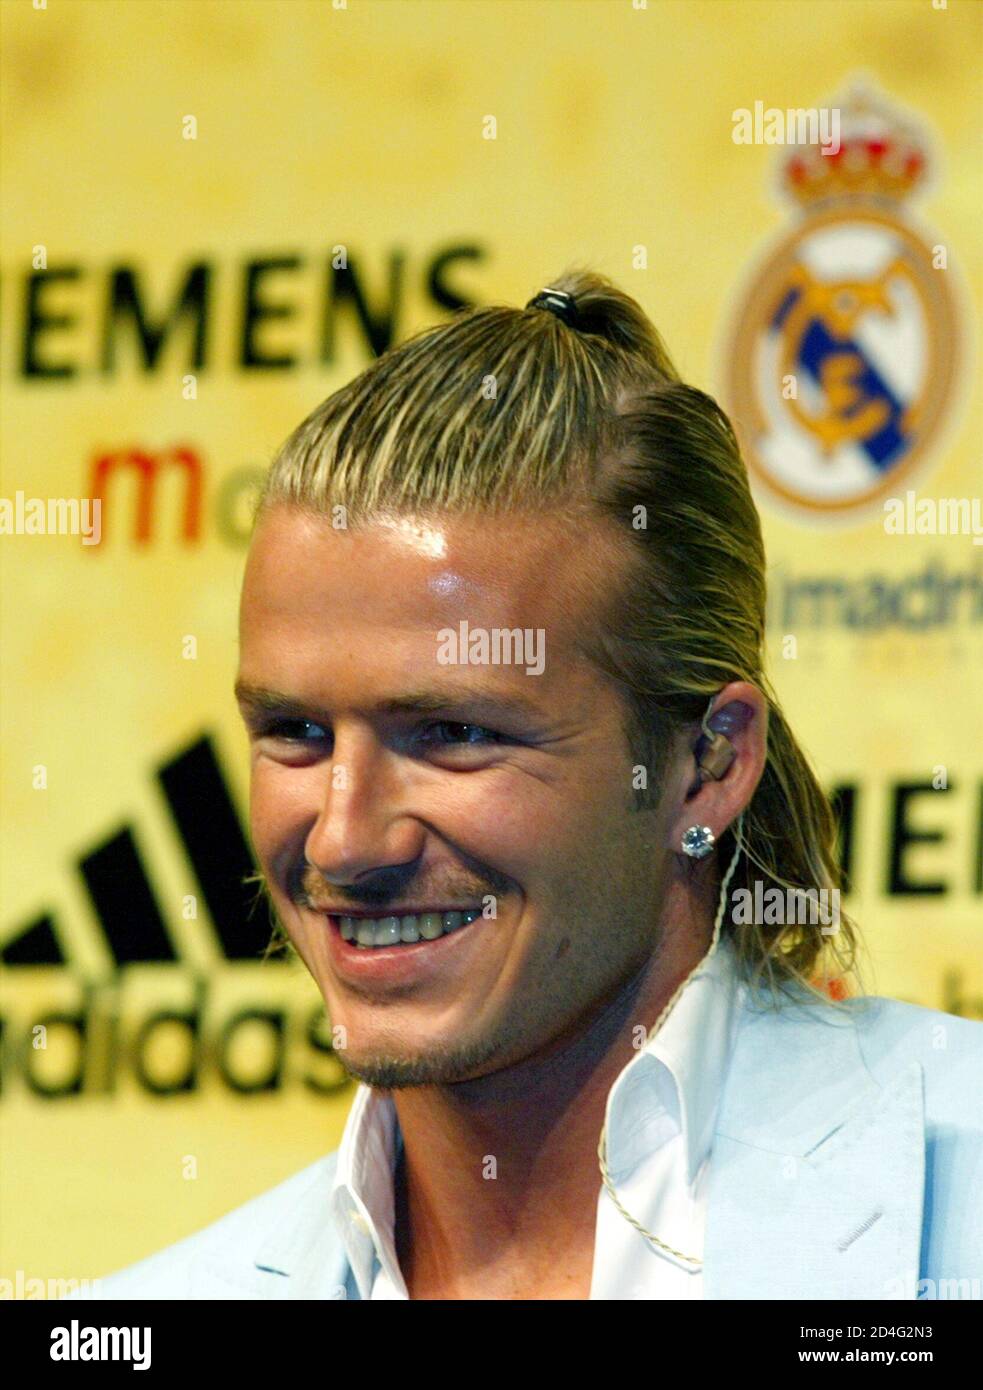 Real Madrid S New Signing England S David Beckham Smiles During The Ceremony To Present Him With His New Strip In Madrid July 2 2003 Real Madrid Paid 35 Million Euros For The Midfielder